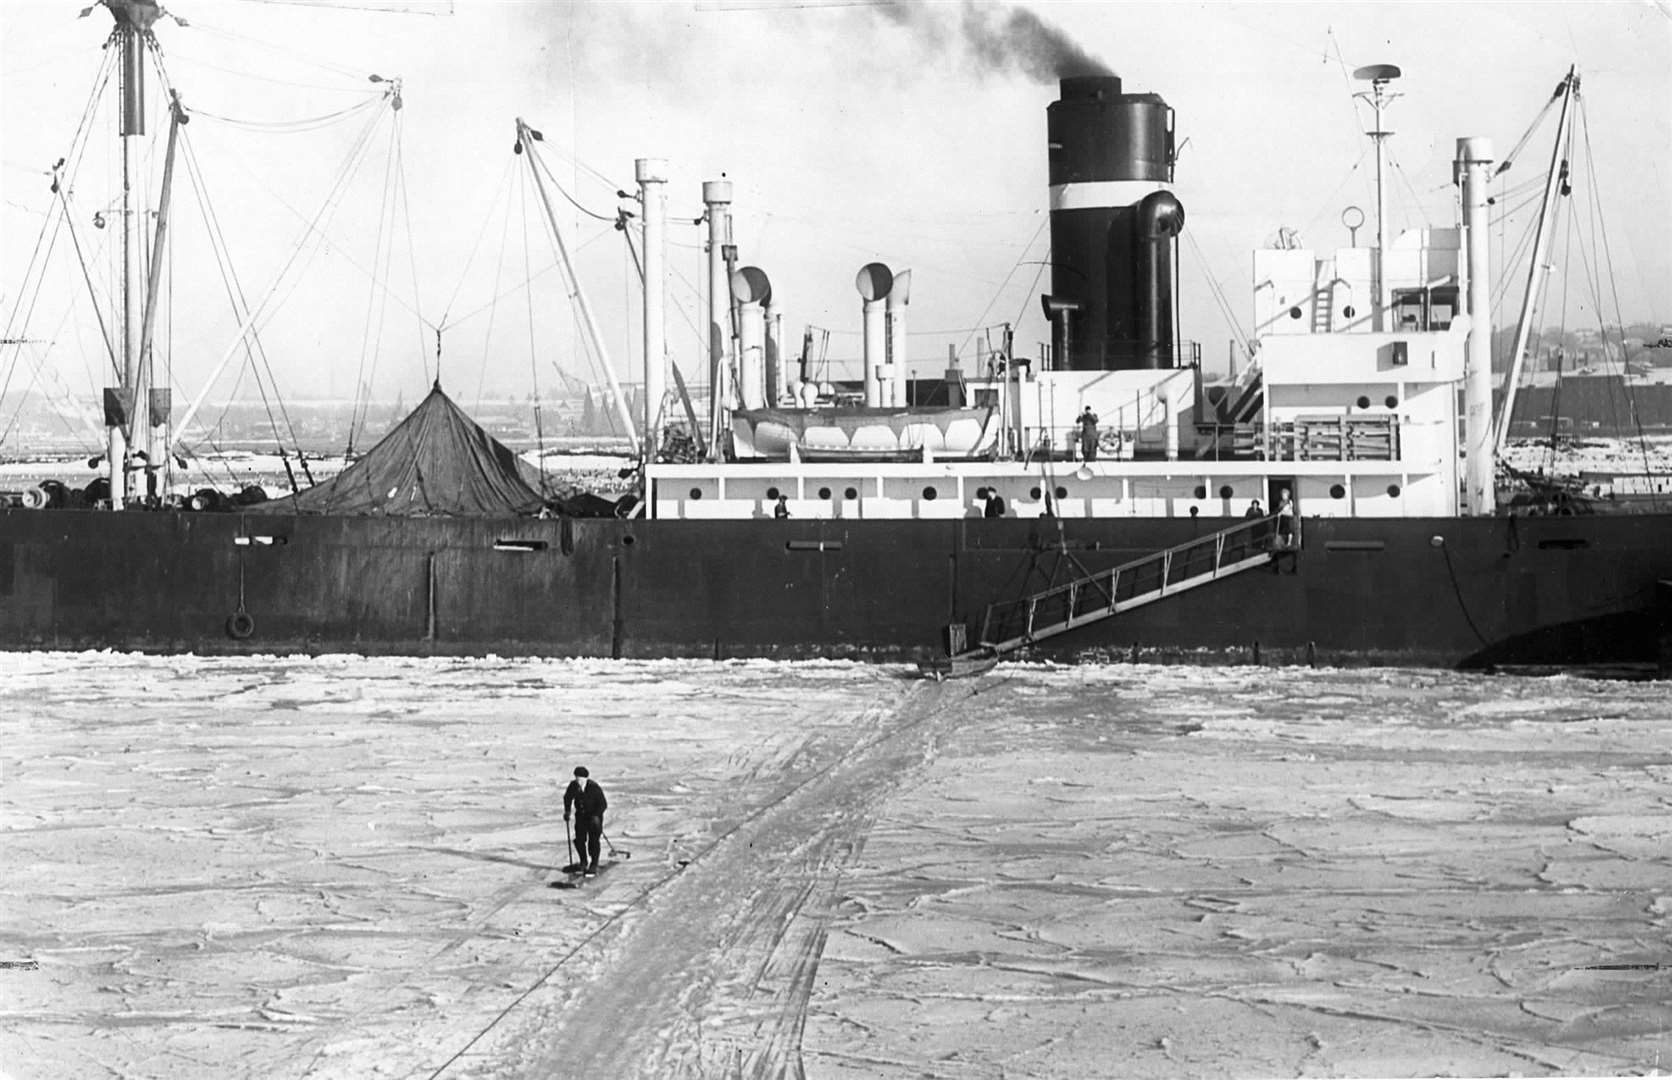 A sailor skis across the frozen River Medway at Rochester from his ship to visit the shops on January 25, 1963